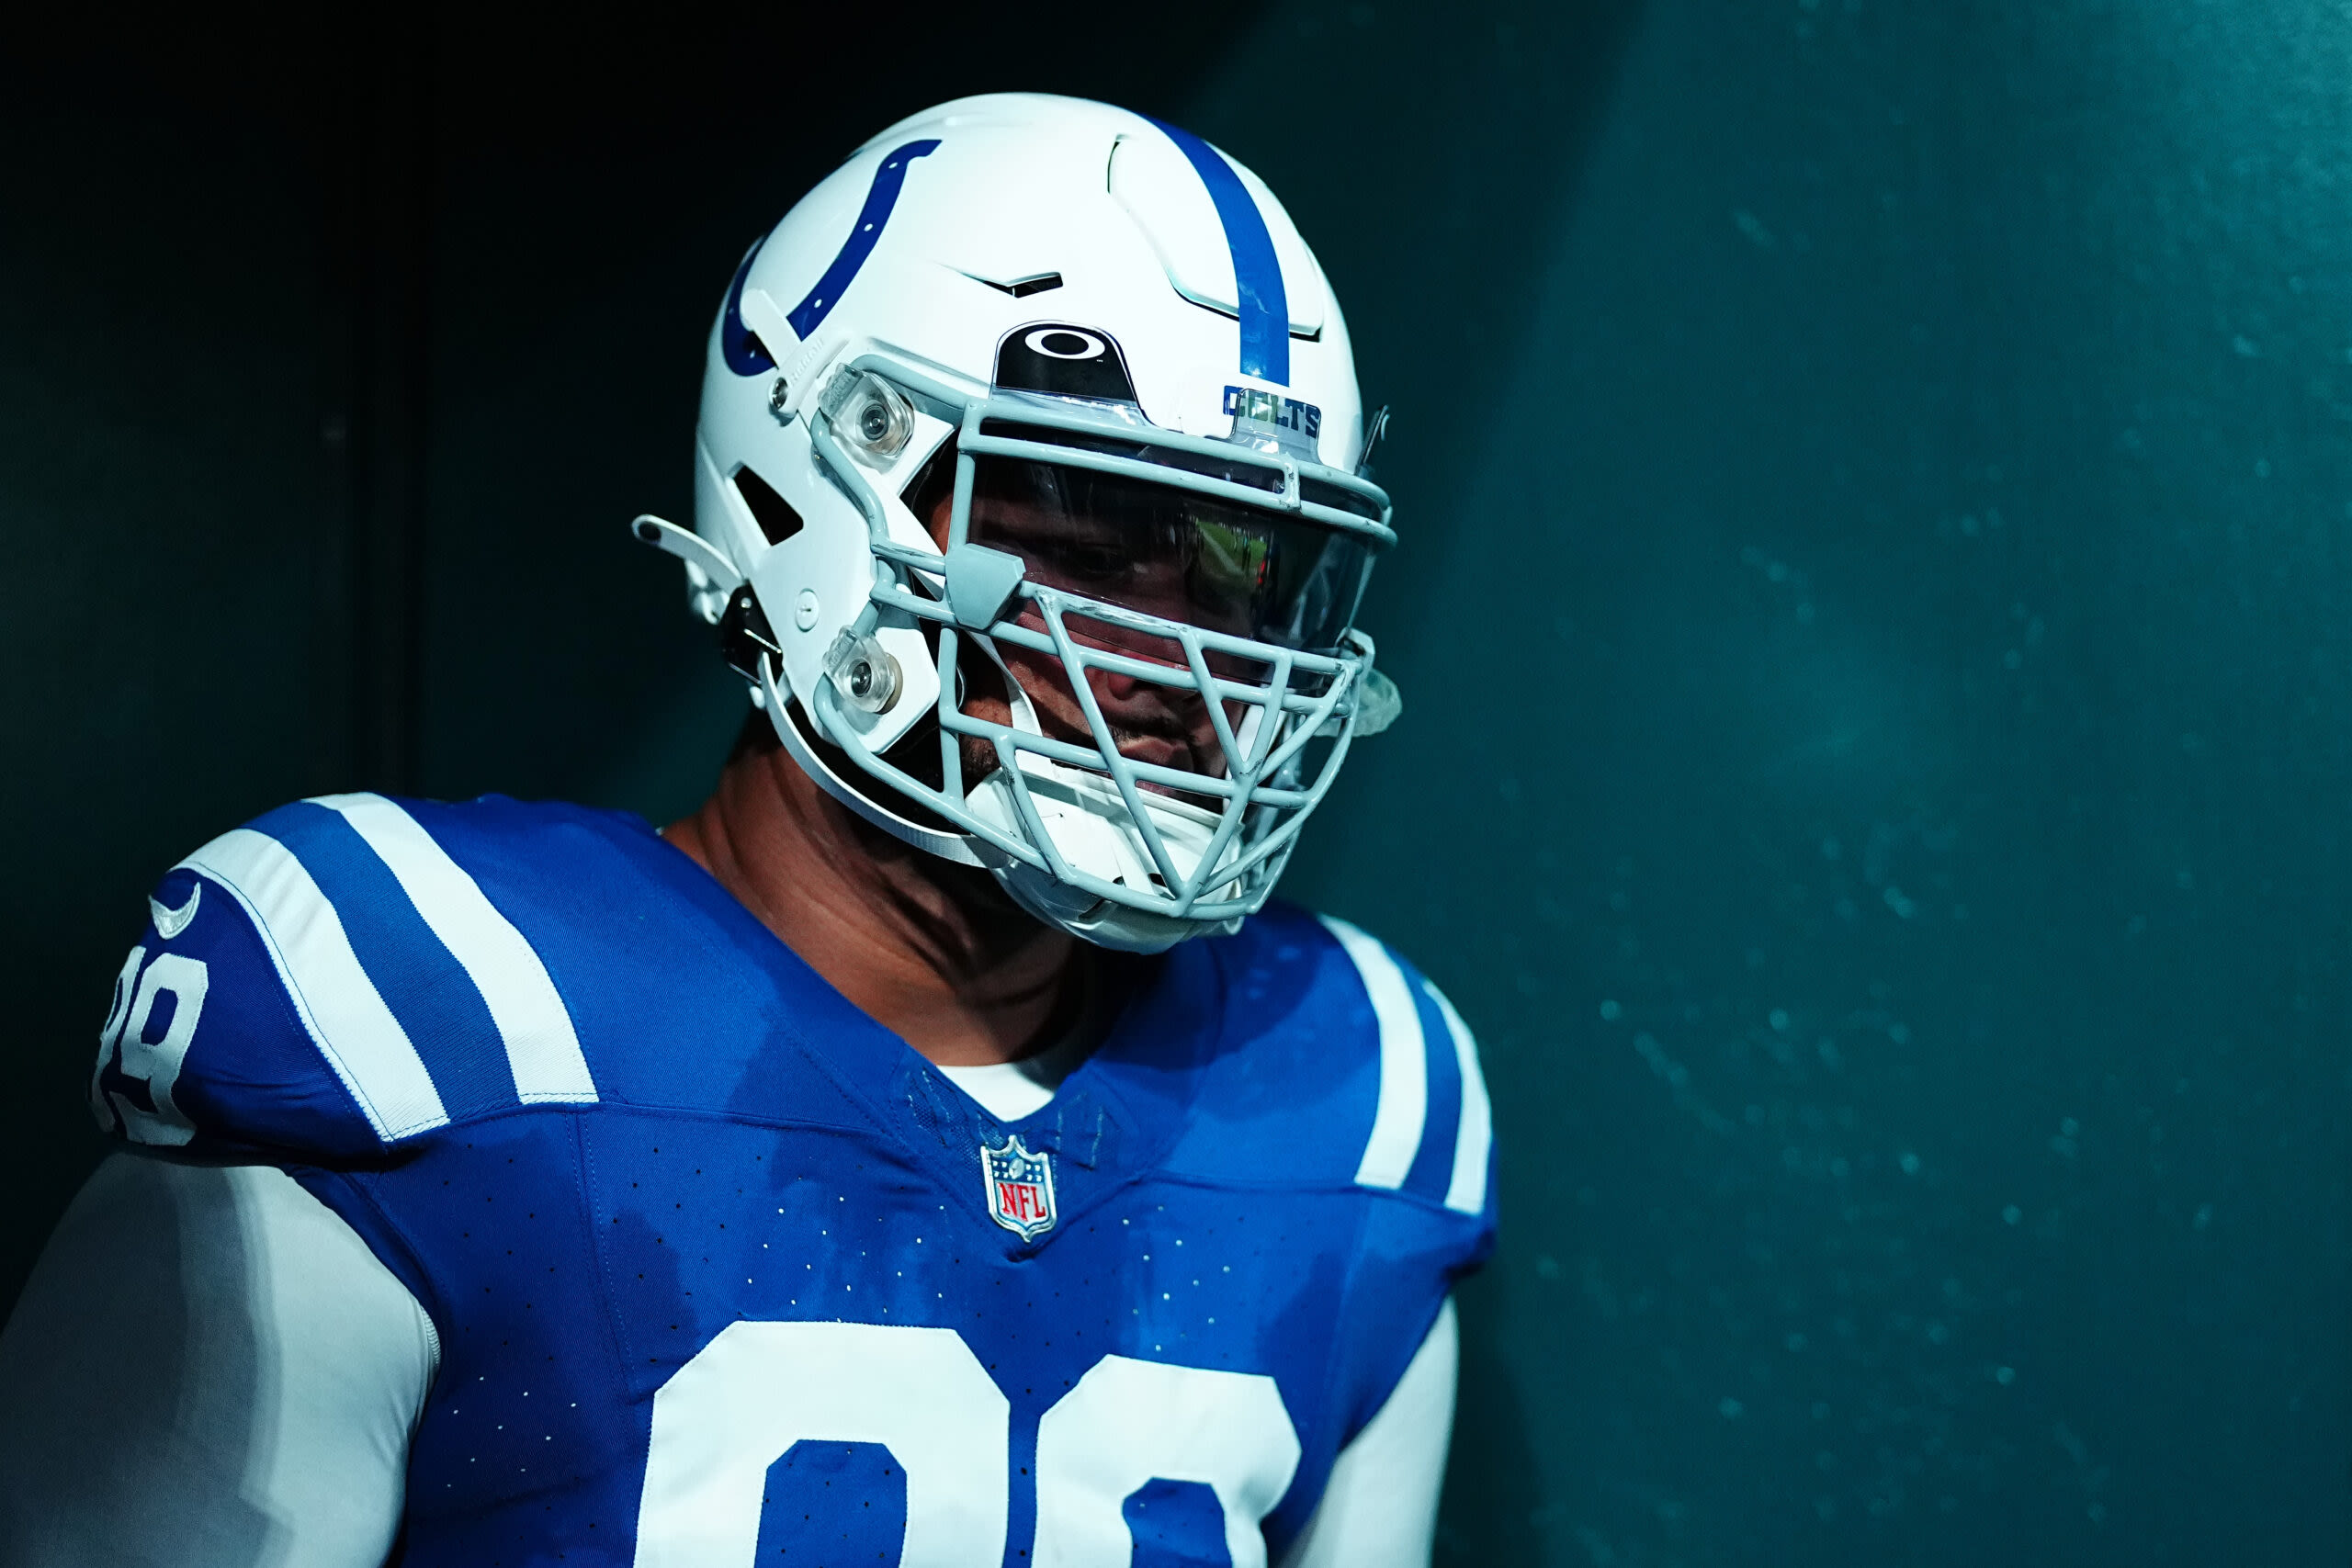 One Colts player earns spot on Pro Football Network’s top 100 list